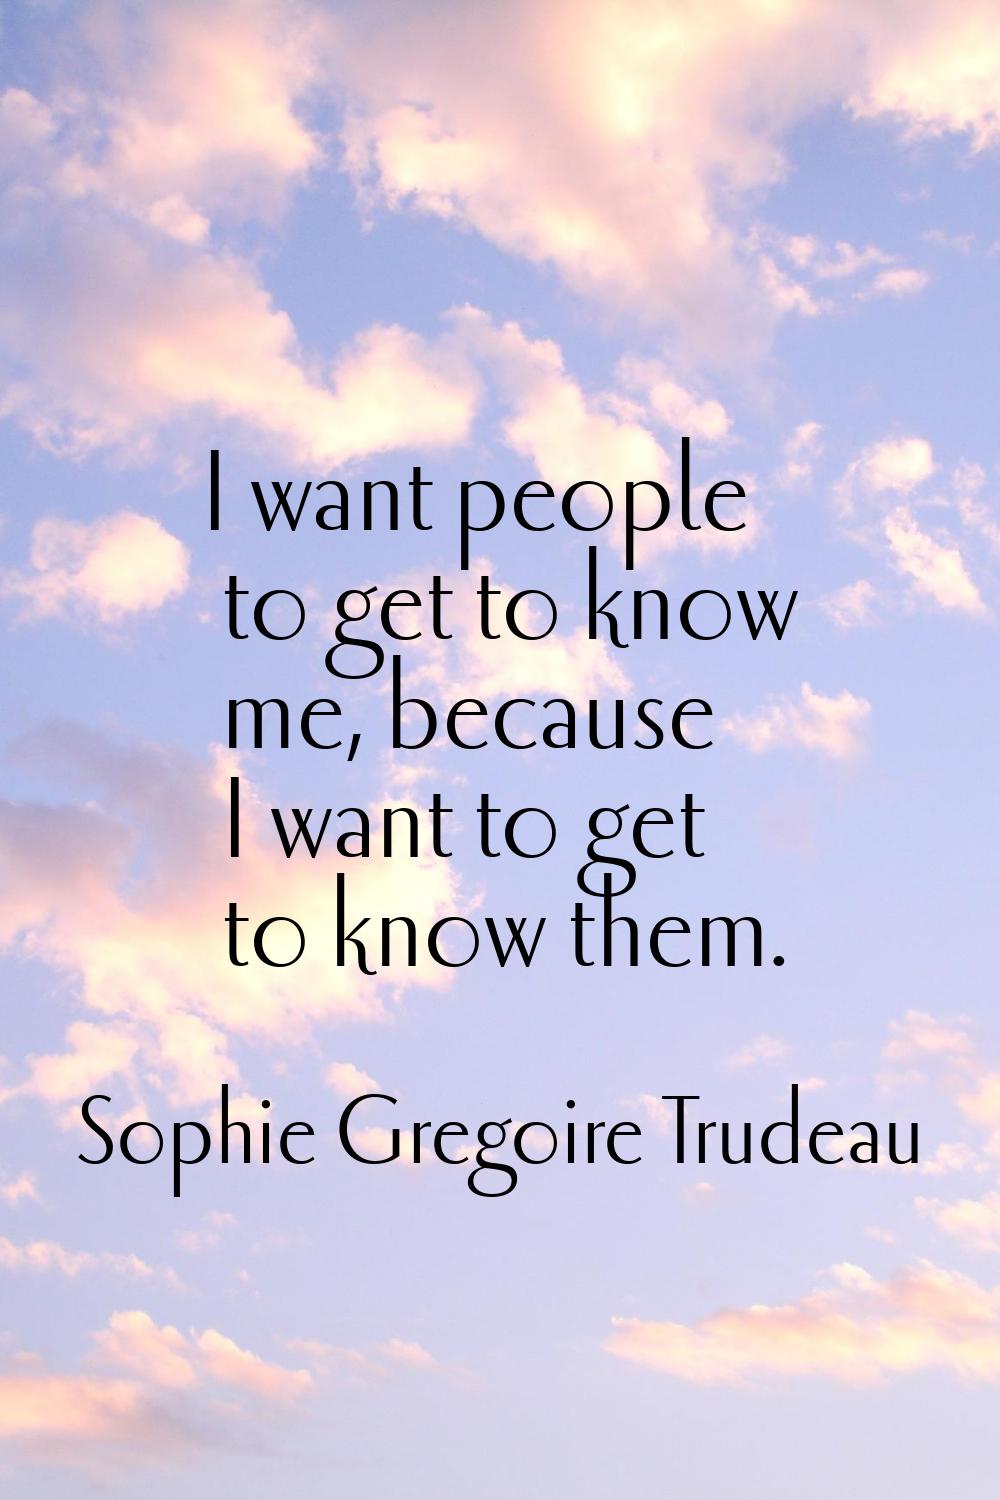 I want people to get to know me, because I want to get to know them.